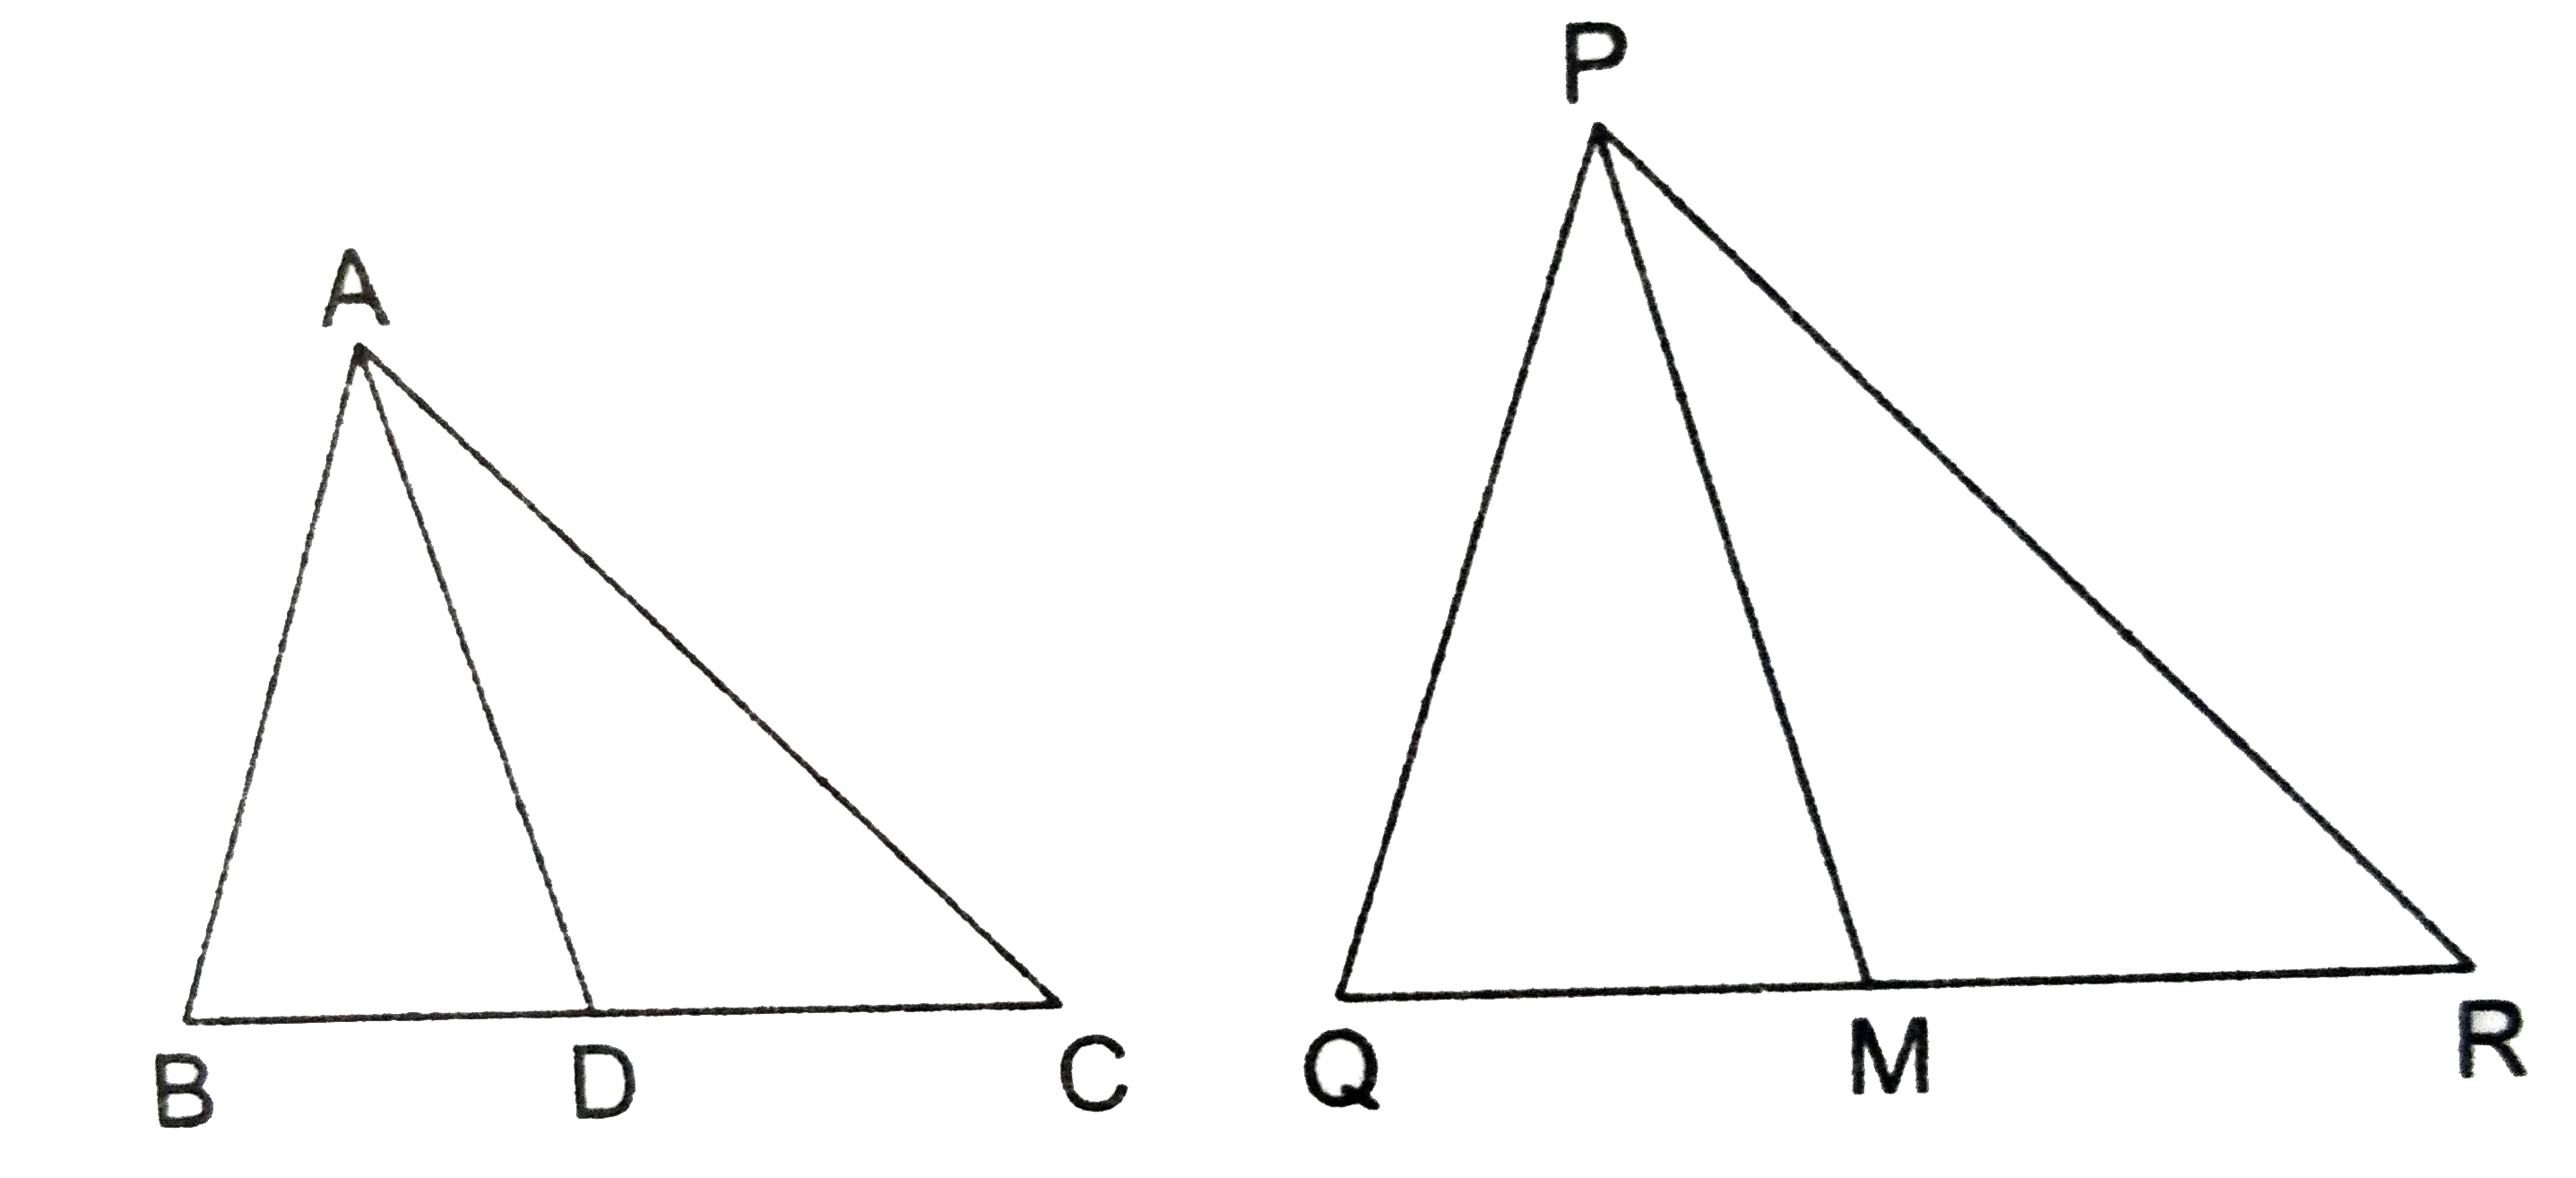 Sides AB and AC and median AD of a triangle ABC are respectively proportional to sides PQ and PR and median PM of another triangle PQR. Prove that Delta ABC~ Detla PQR